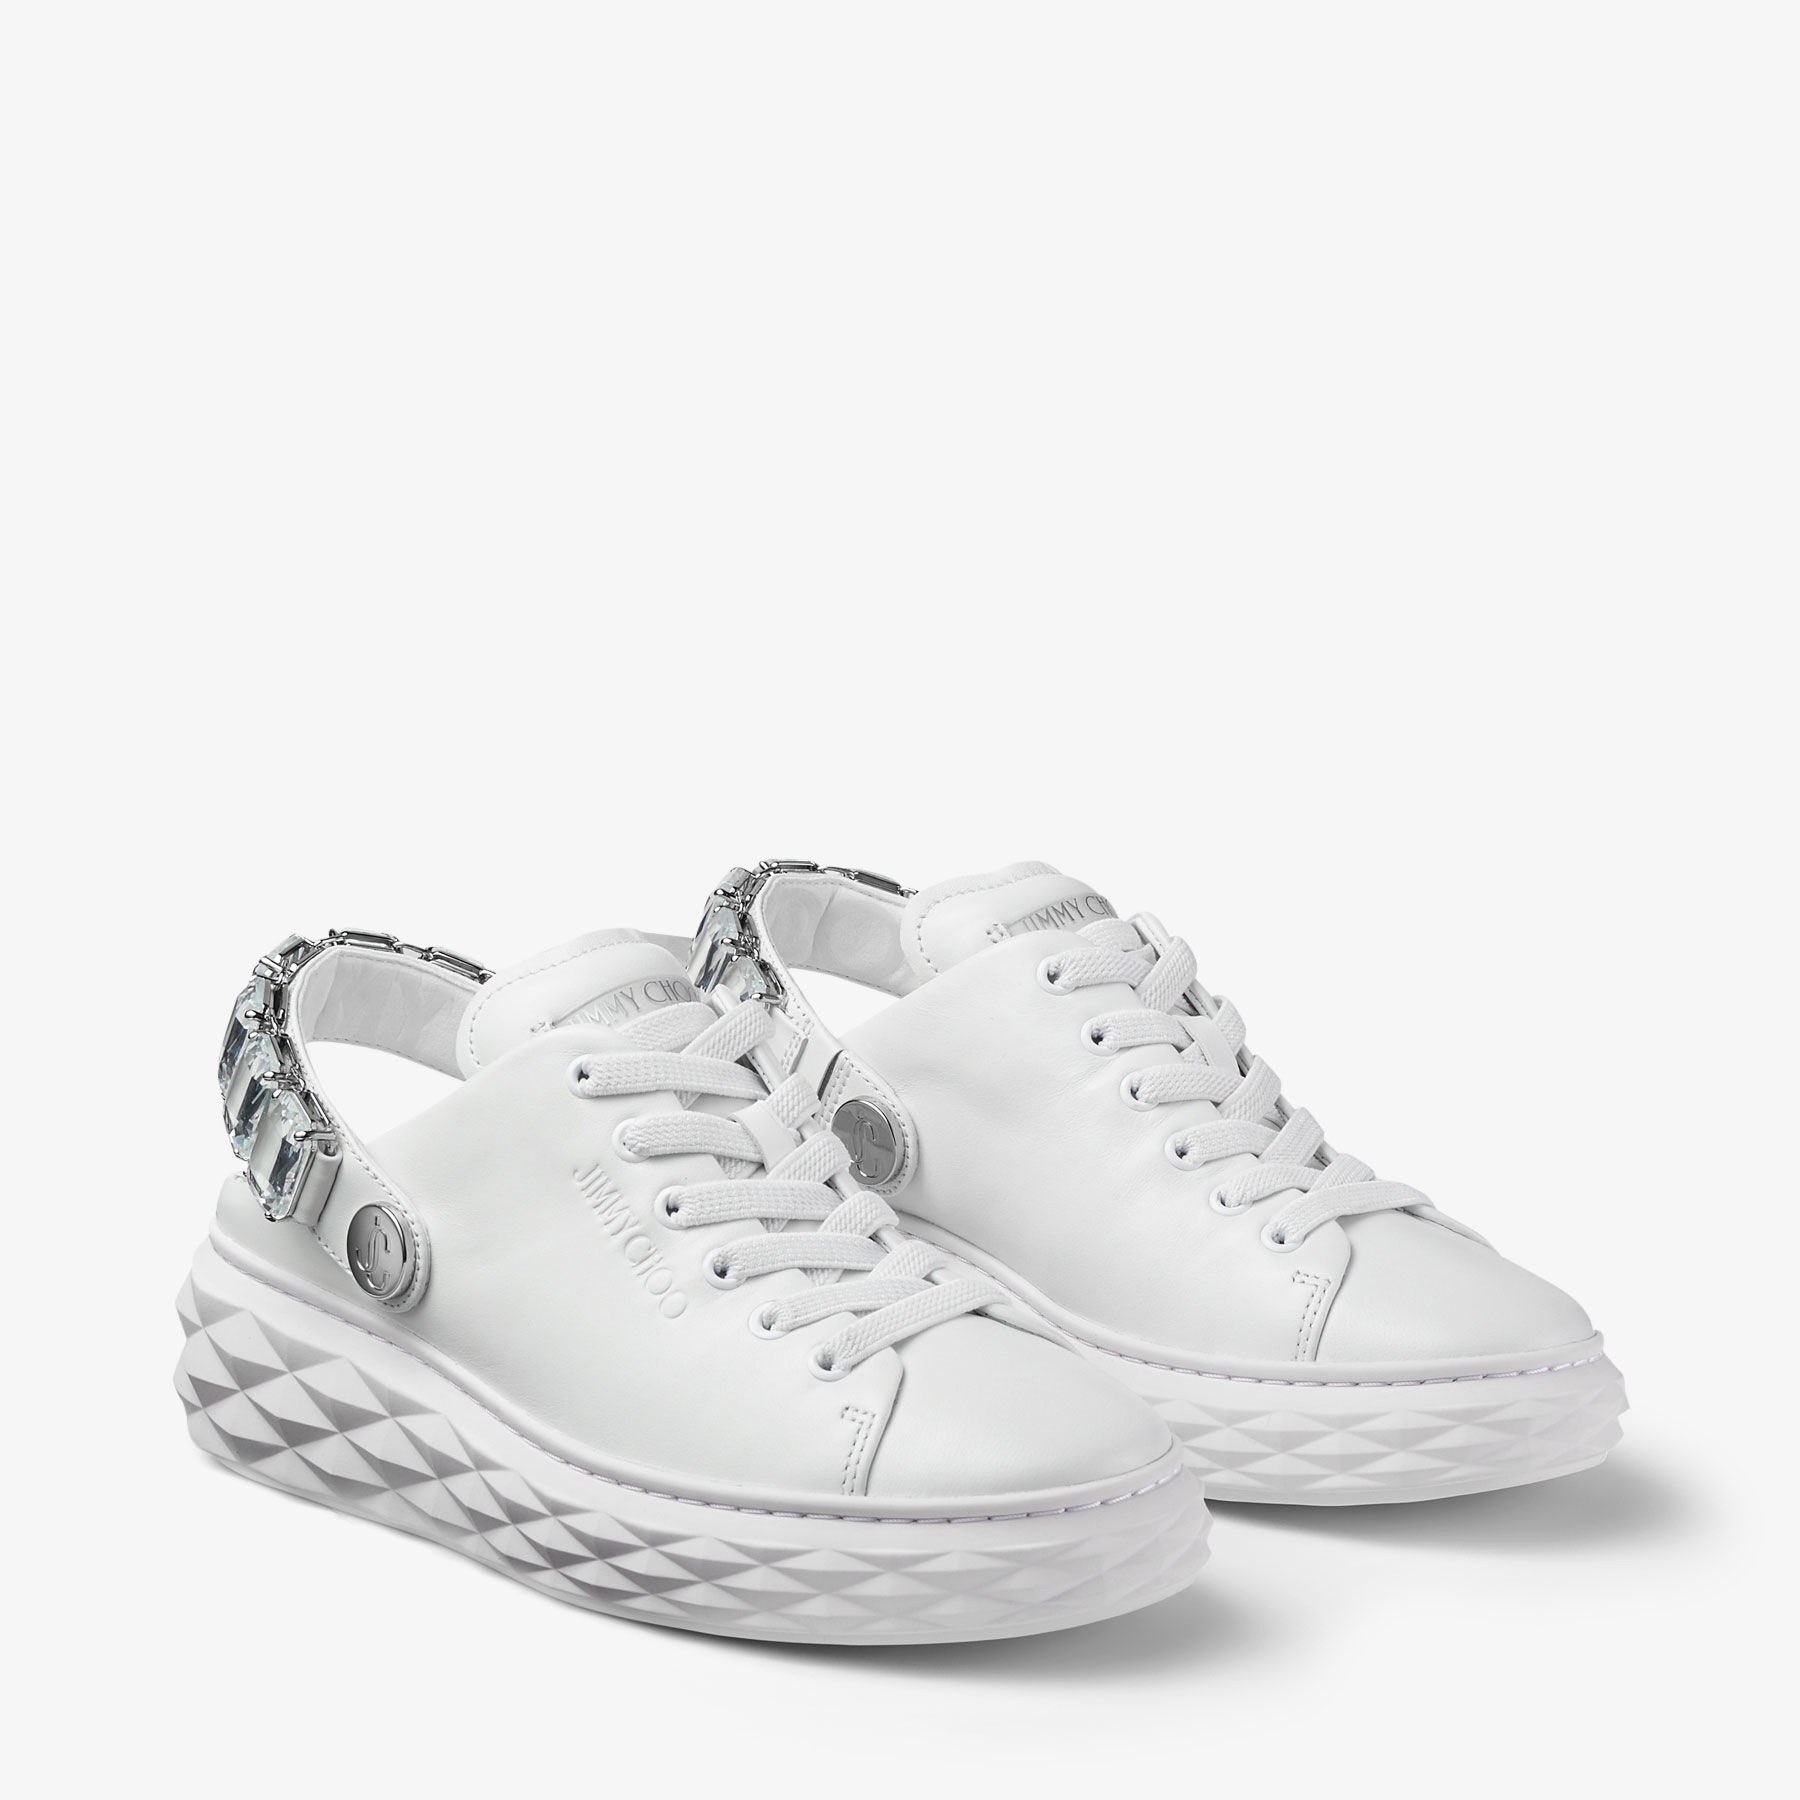 Diamond Maxi Crystal
White Nappa Leather Slipper Trainers with Crystal Strap - 2